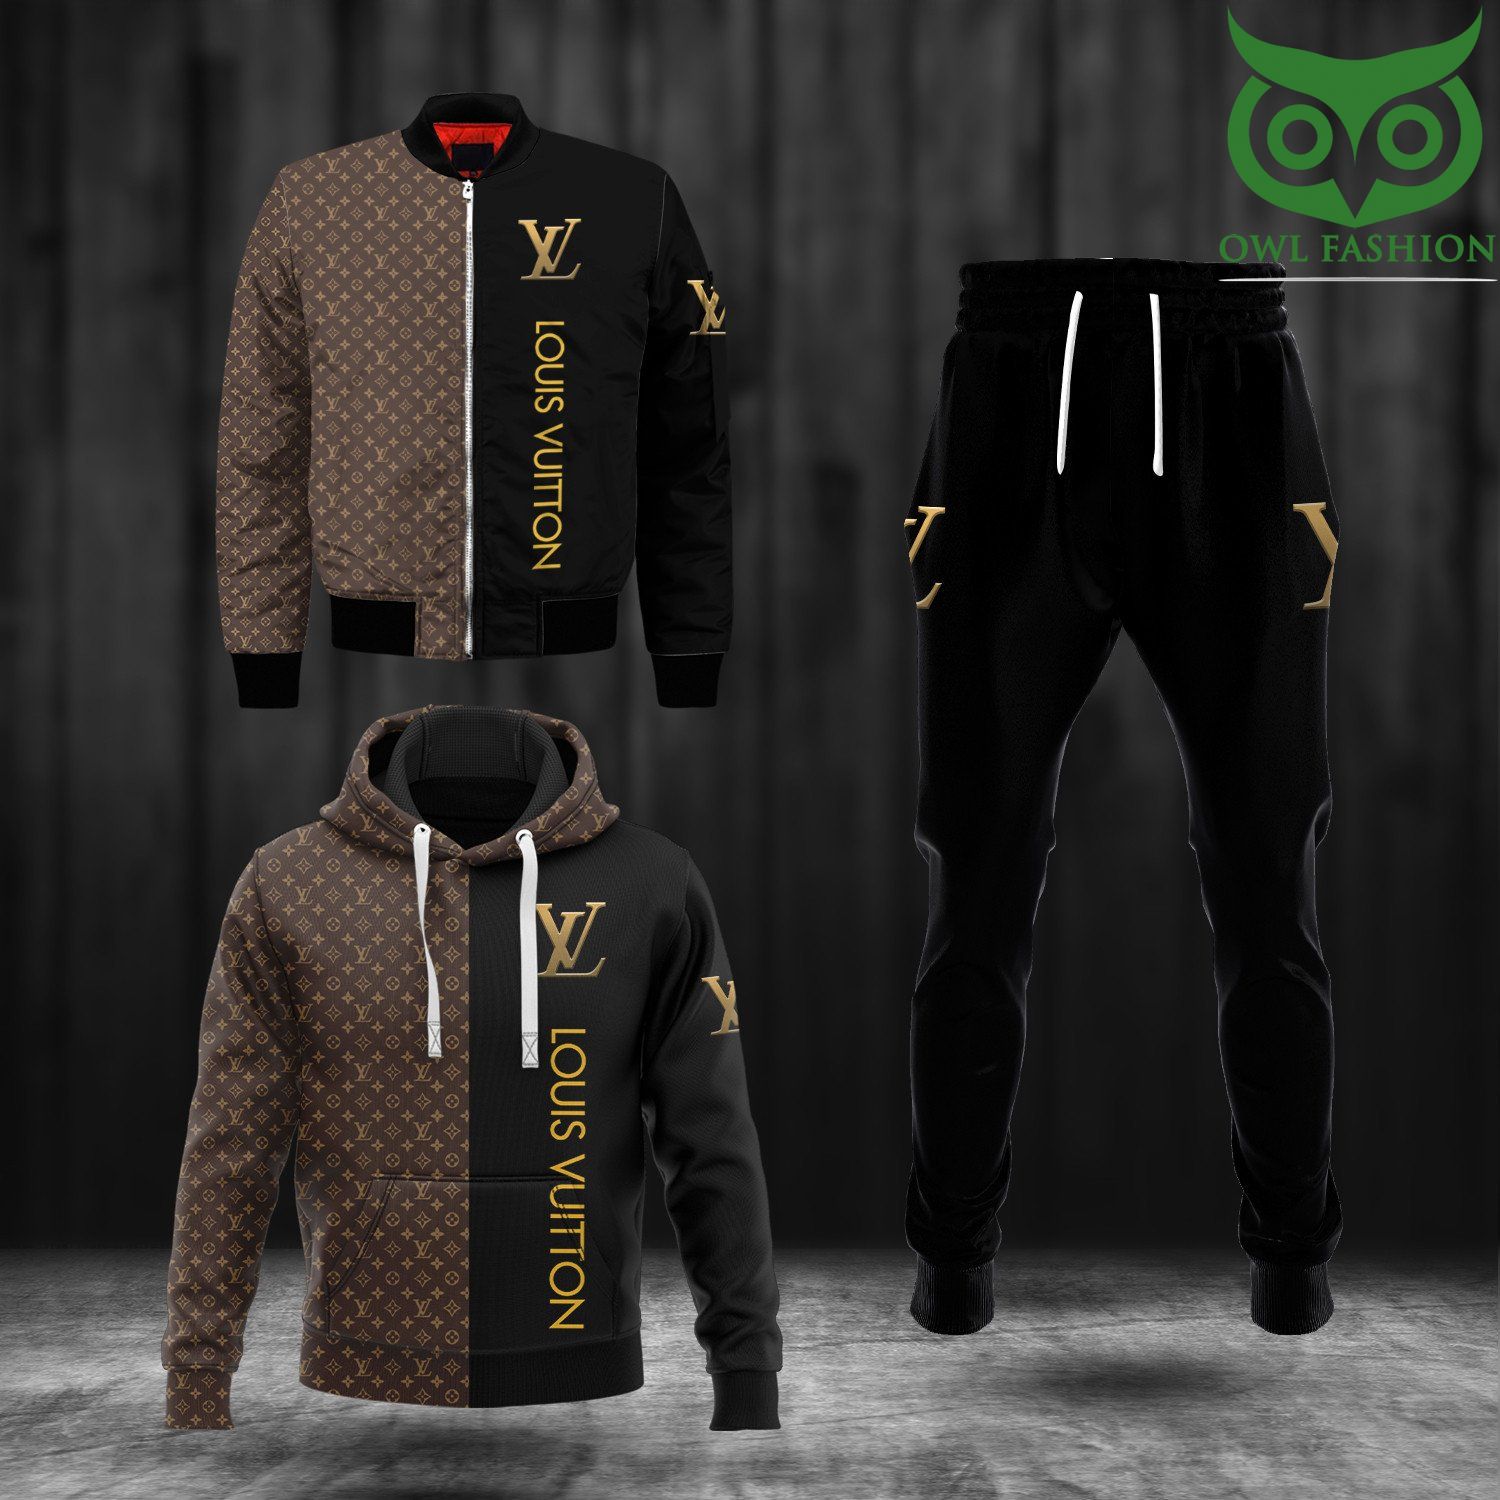 2 Louis Vuitton fashion hoodie and pants LUXURY